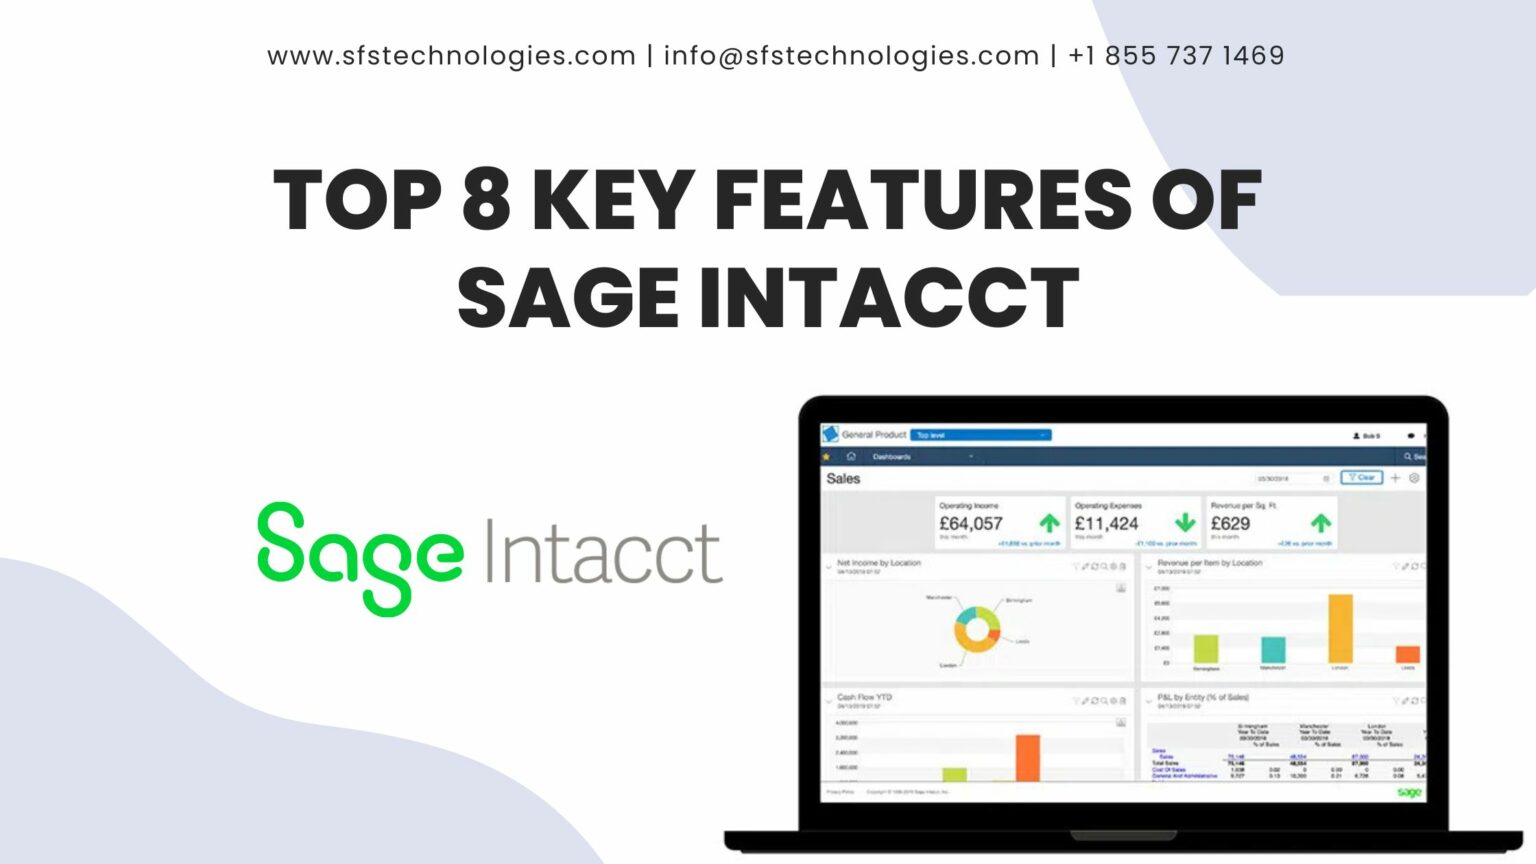 Top 8 Key Features of Sage Intacct